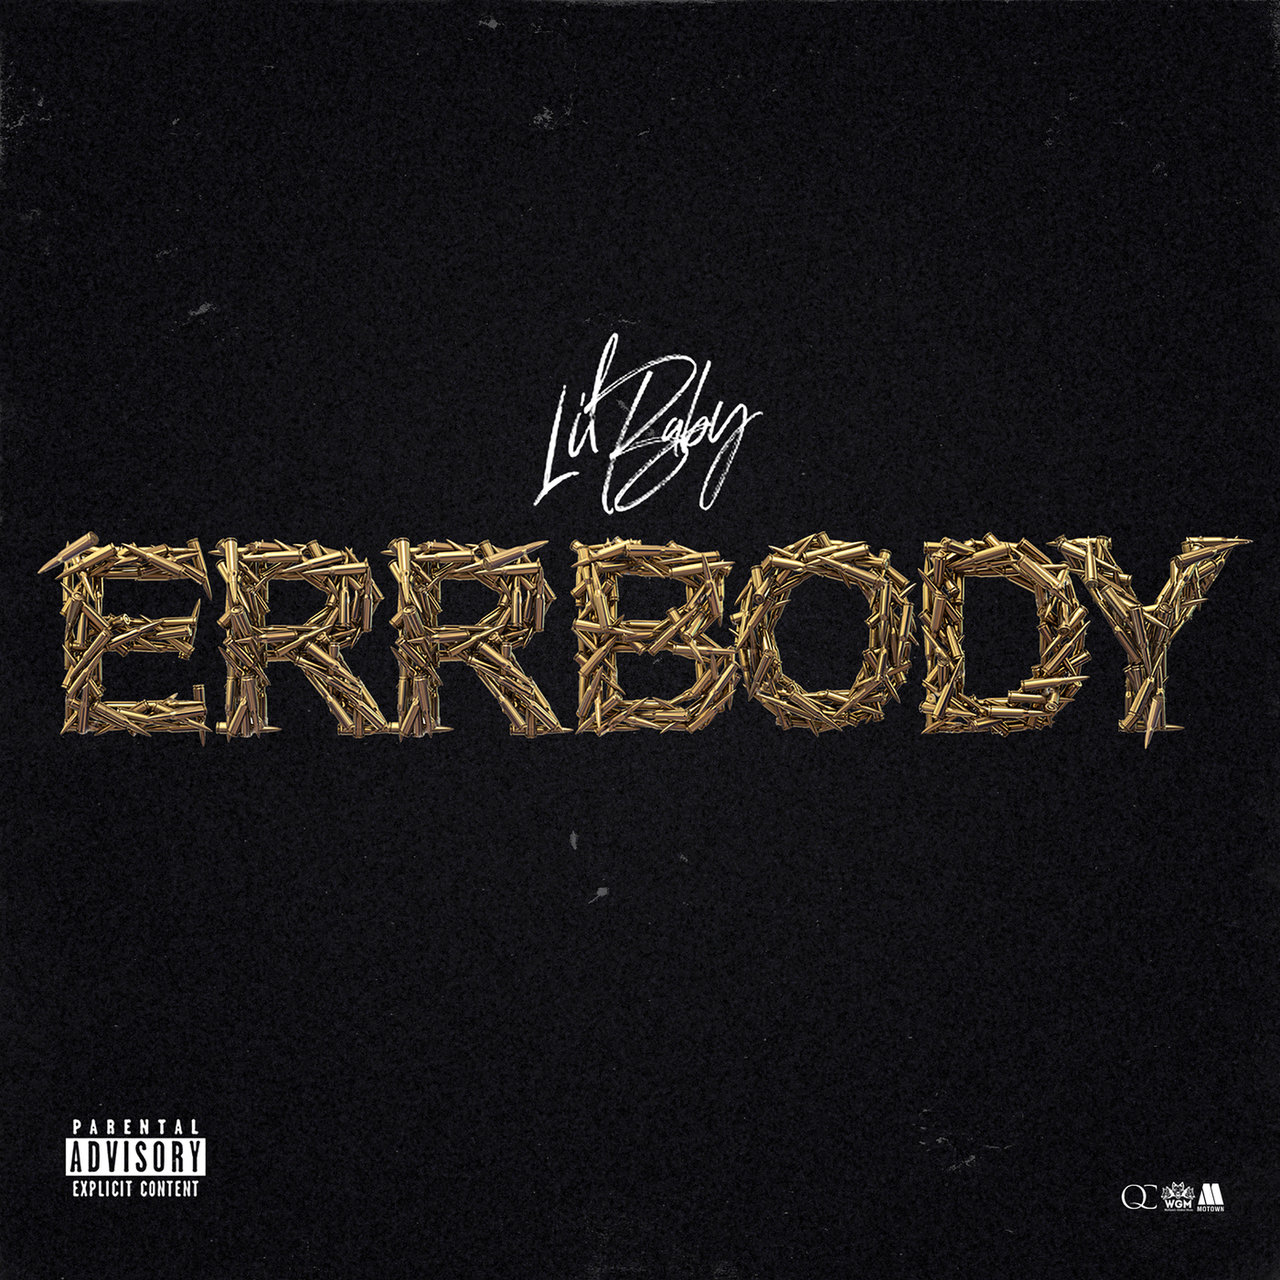 Lil Baby - Errbody (Cover)